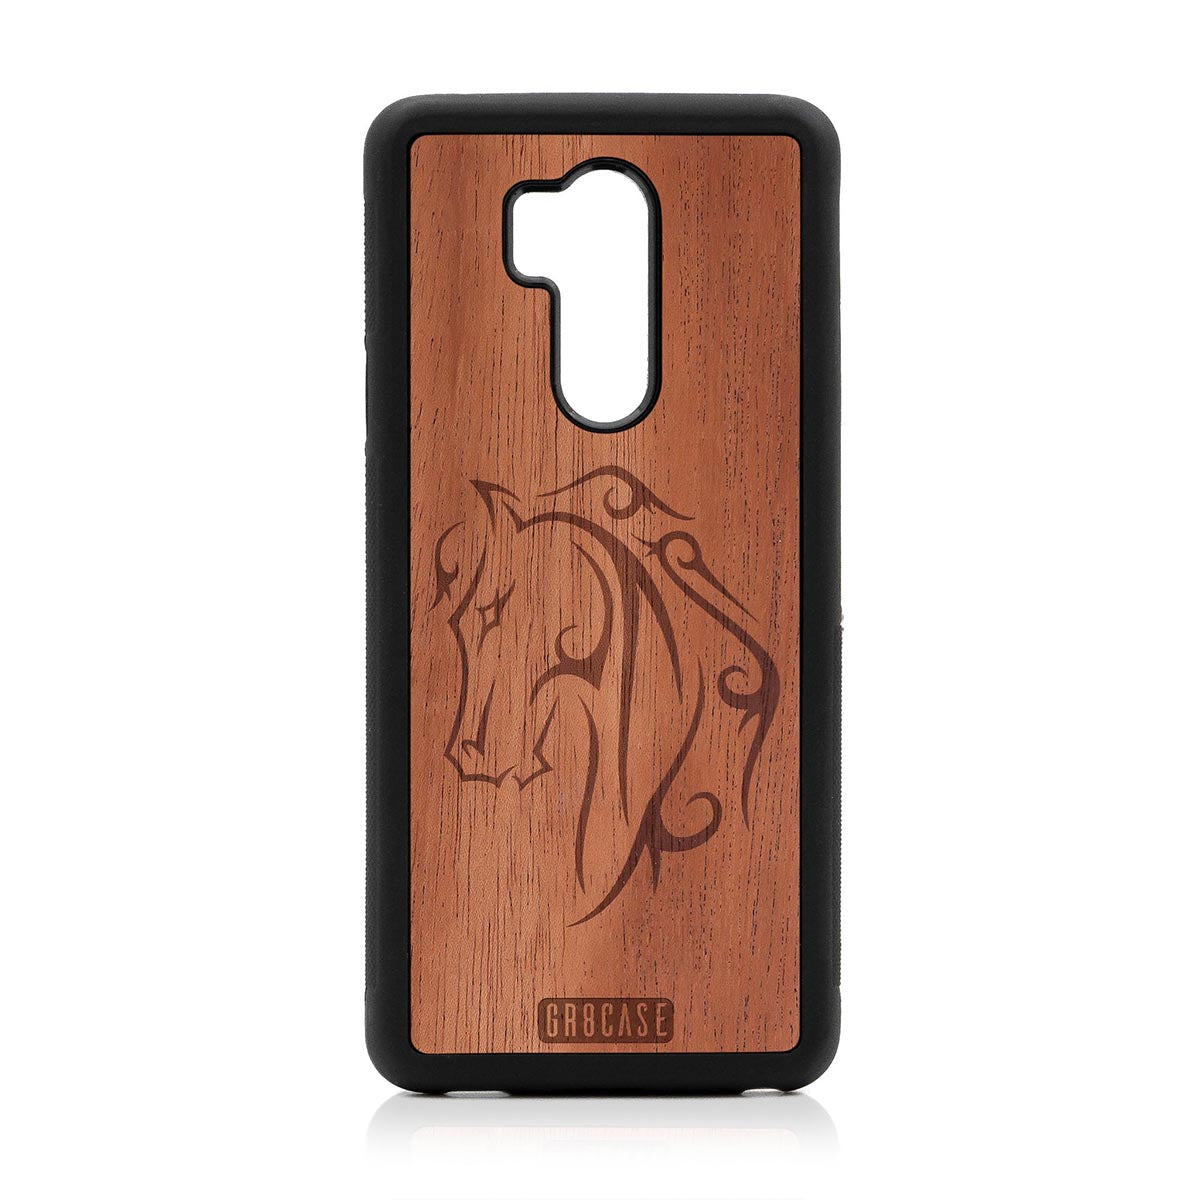 Horse Tattoo Design Wood Case LG G7 ThinQ by GR8CASE